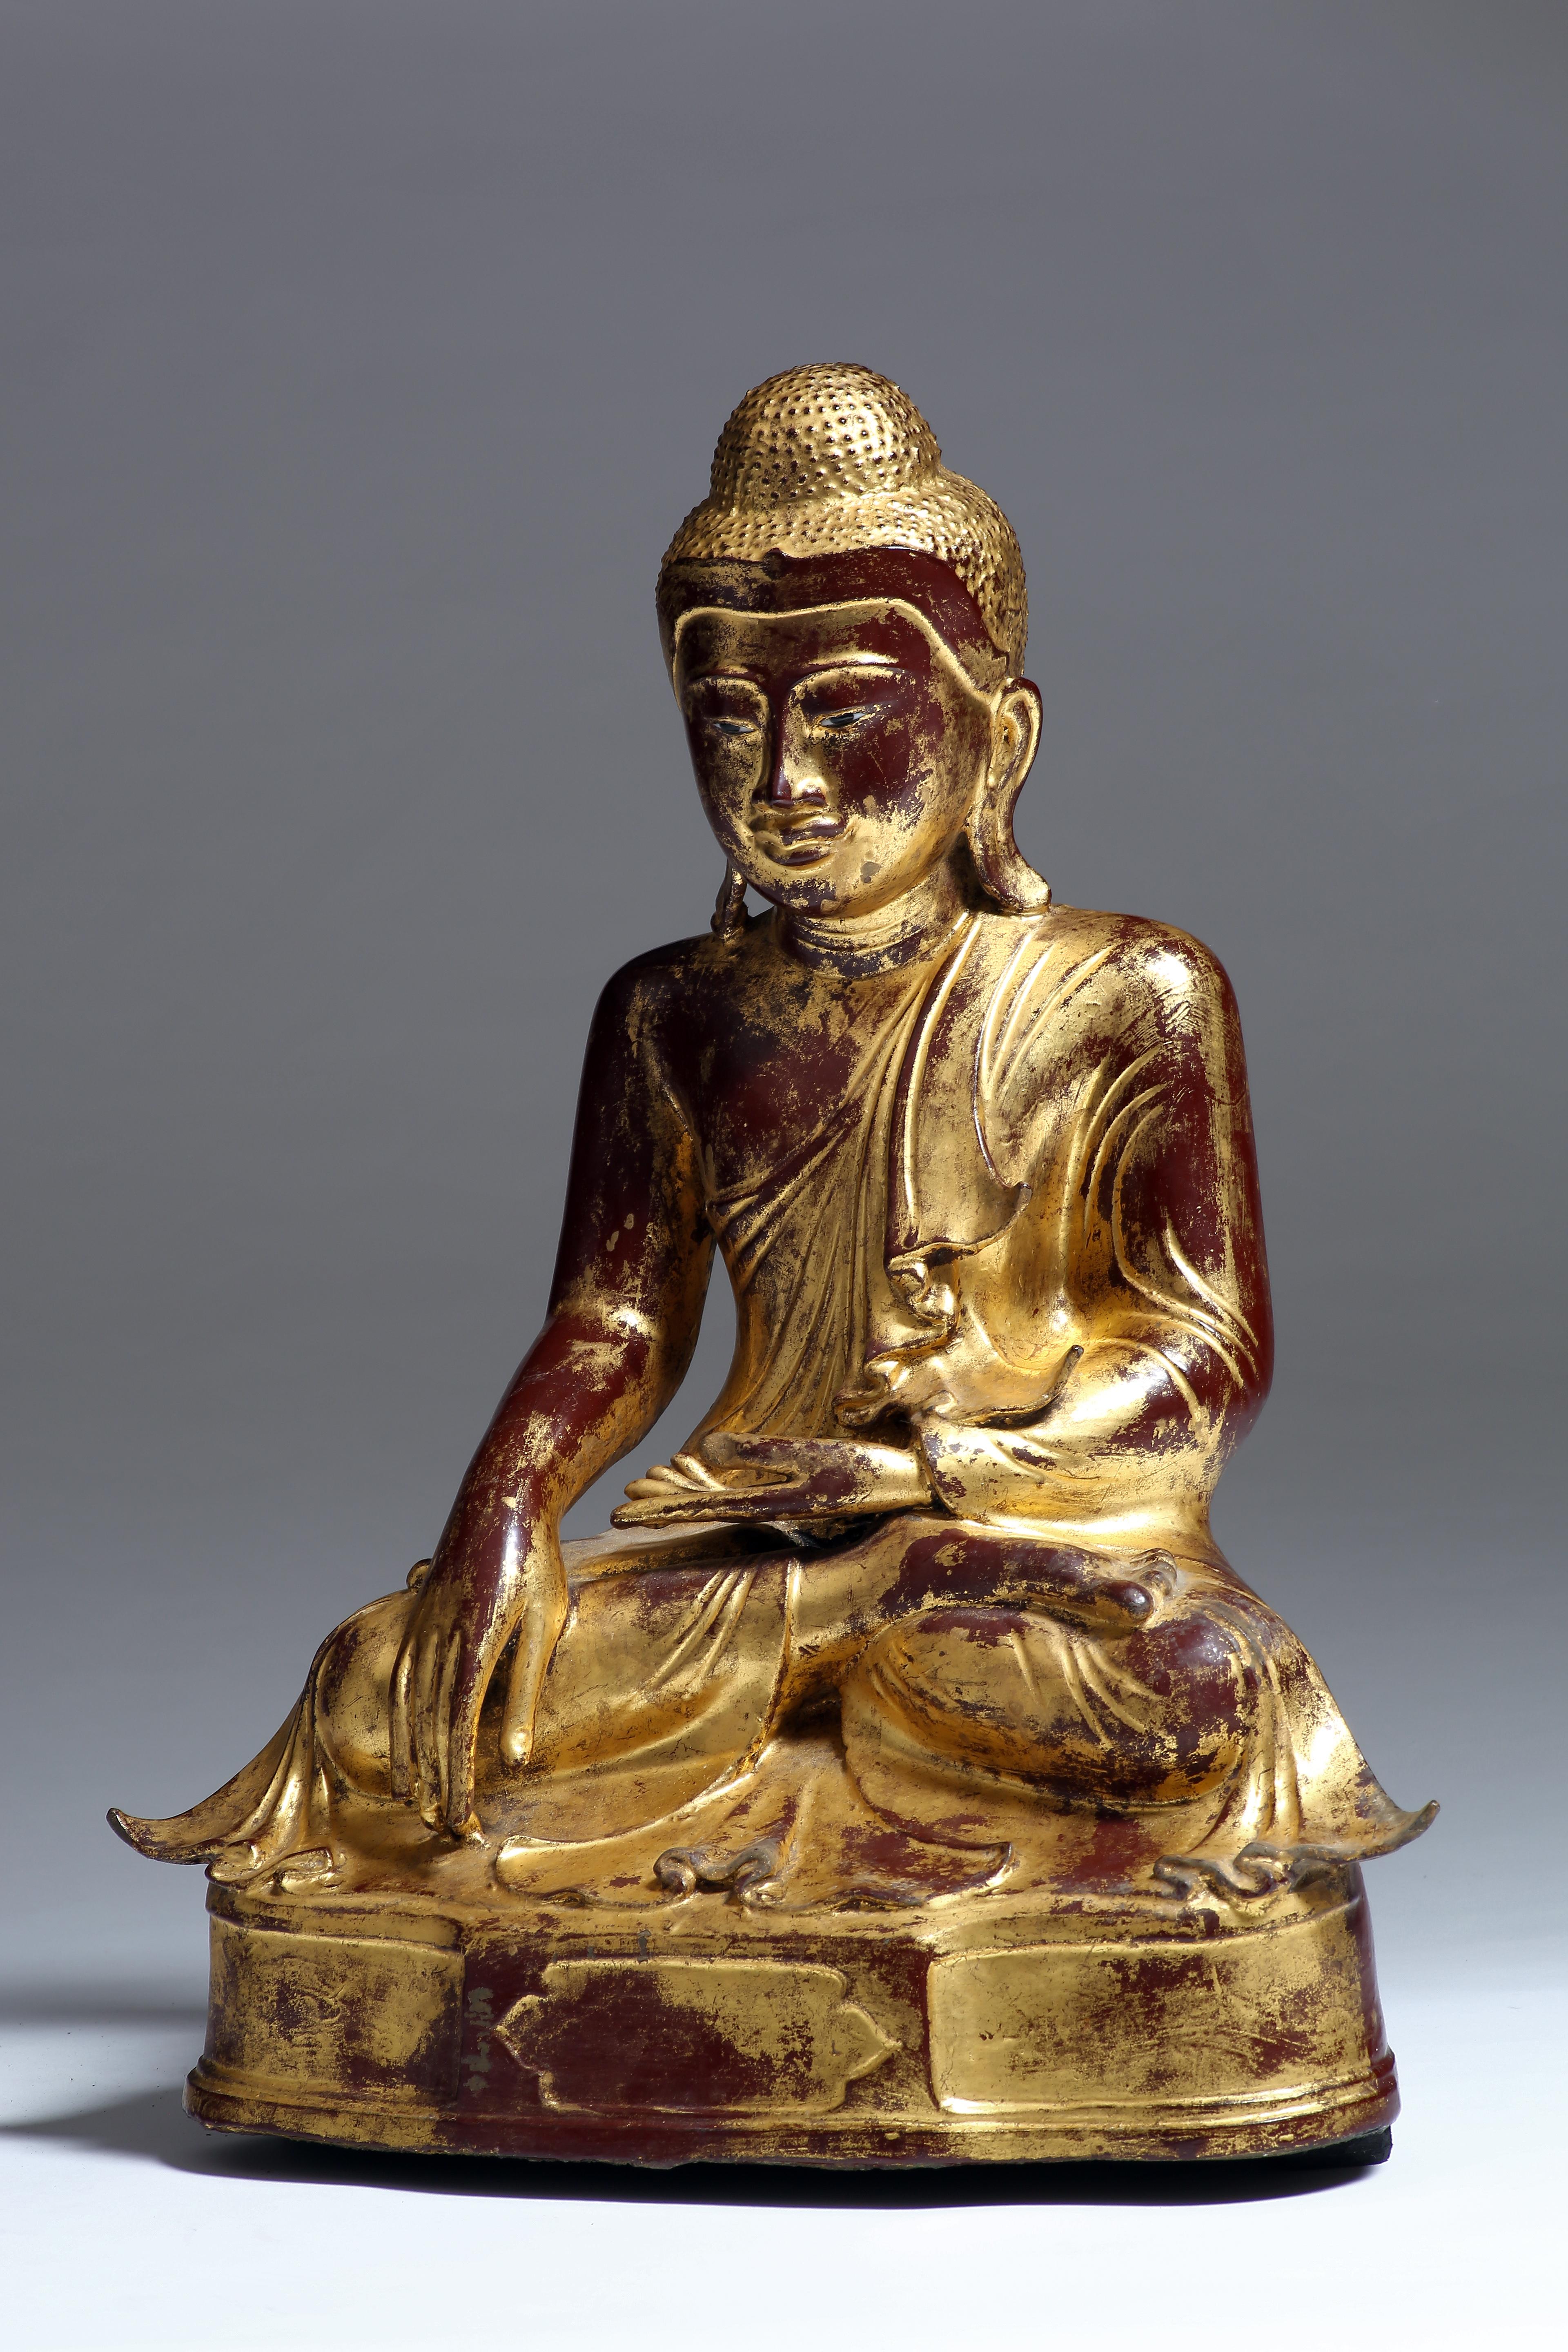 The Buddha is seated on a low base in vajrasana (lotus) position with bhumisparsha mudra, in which the finger-tips of the right hand touch the earth to symbolize the moment of enlightenment. The Buddha has a serene expression and is clothed in